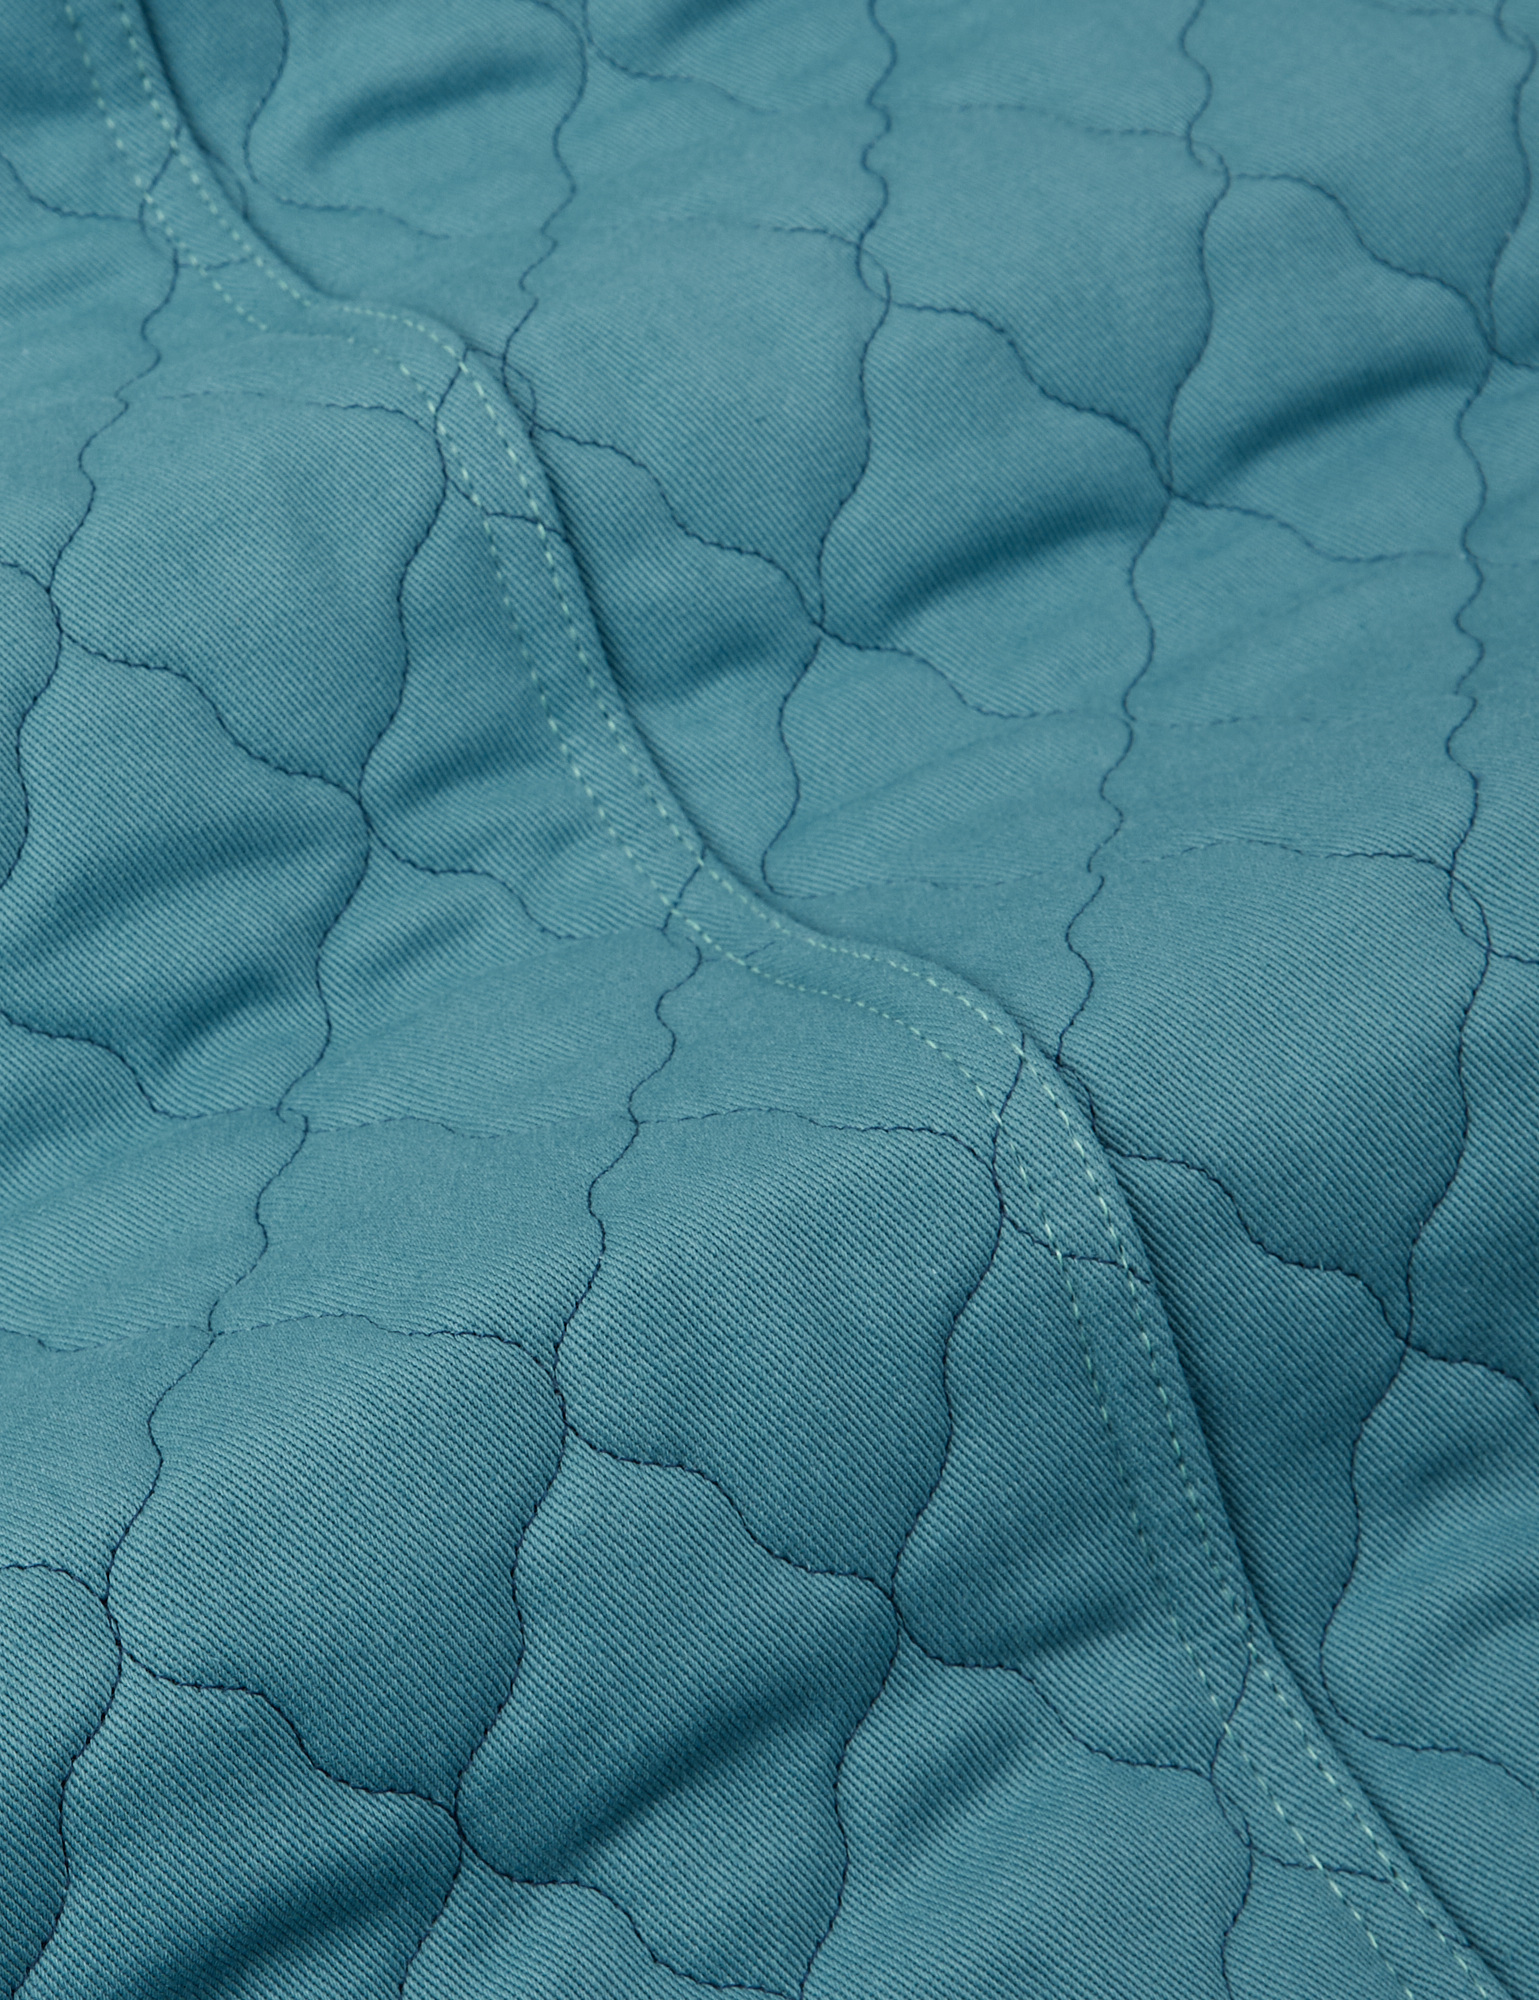 Quilted Overcoat in Marine Blue fabric detail close up